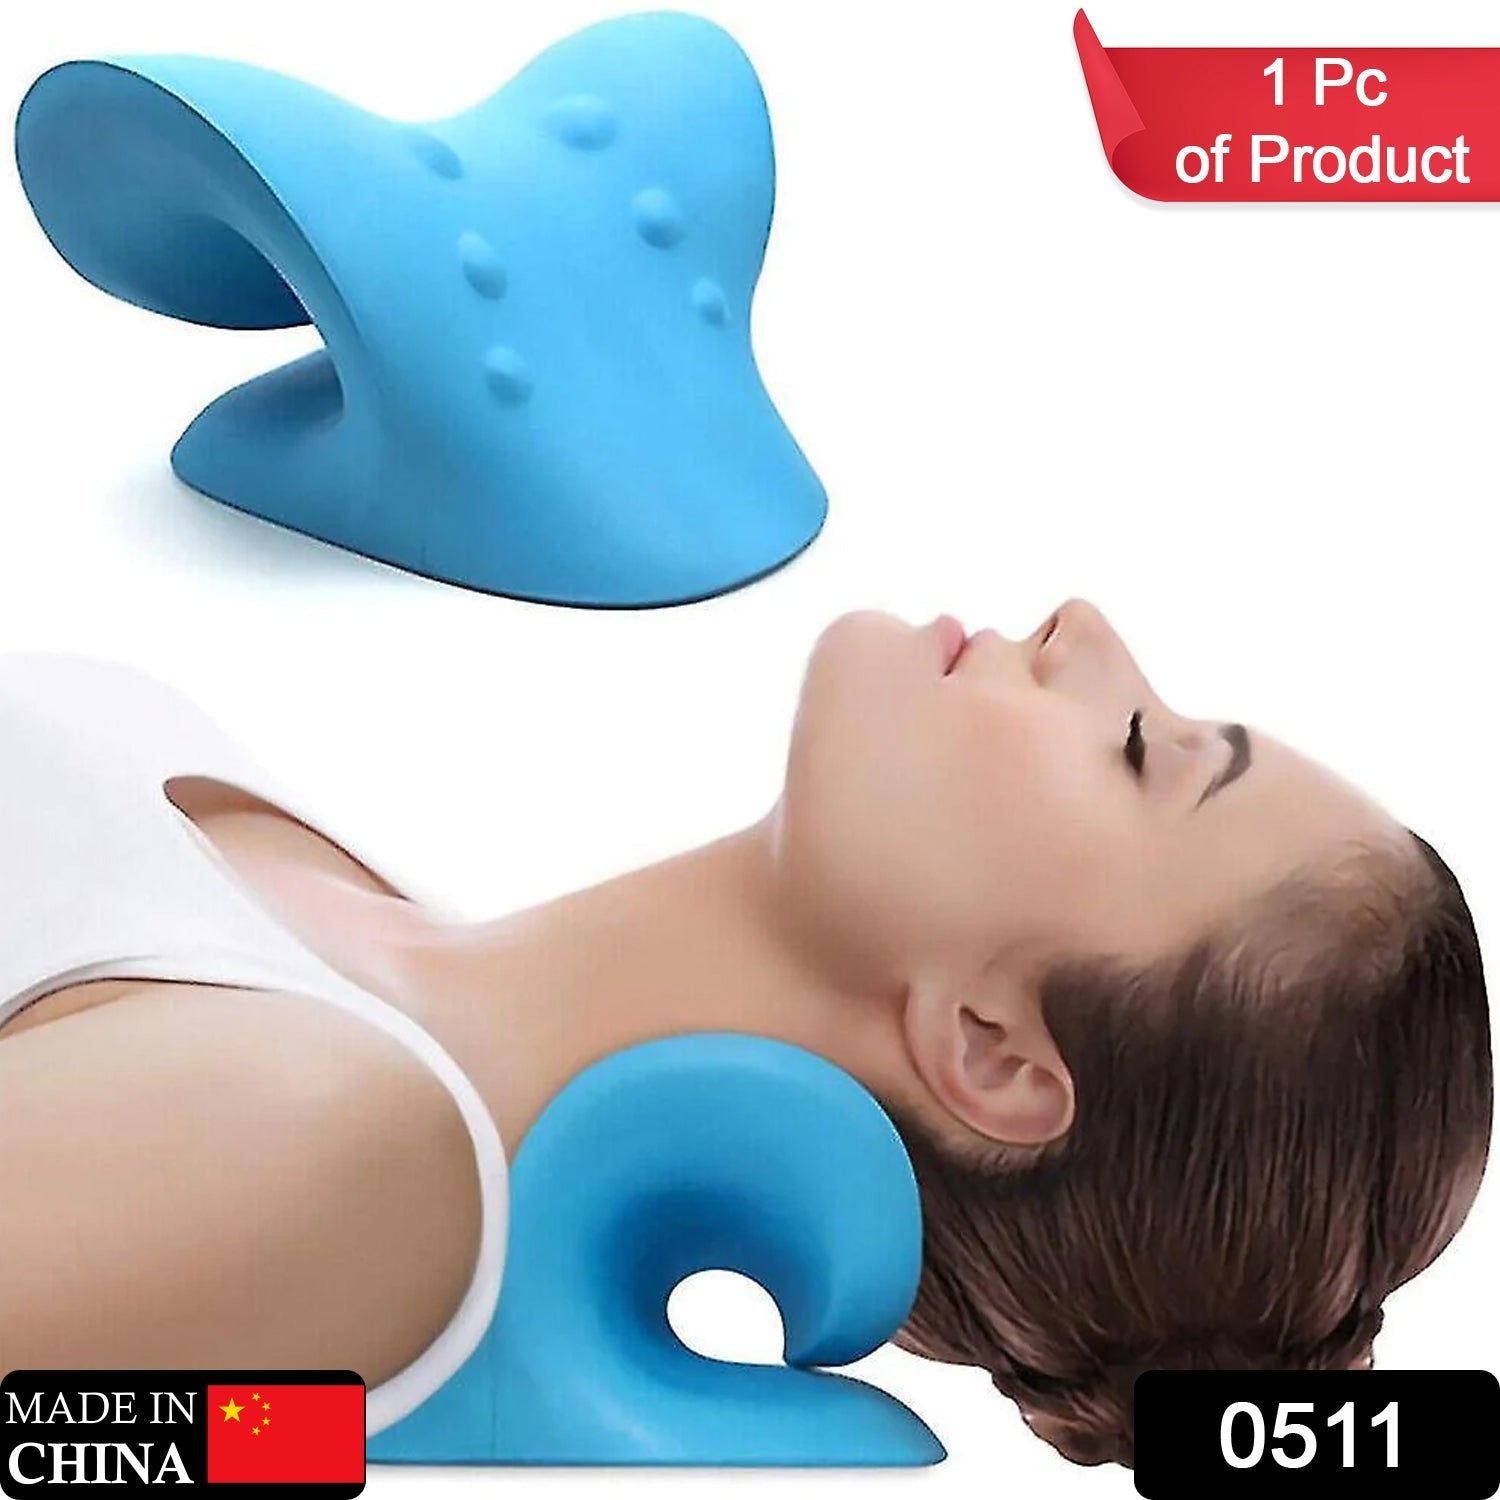 0511 Neck Relaxer | Cervical Pillow for Neck & Shoulder Pain | Chiropractic Acupressure Manual Massage | Medical Grade Material | Recommended by Orthopaedics DeoDap